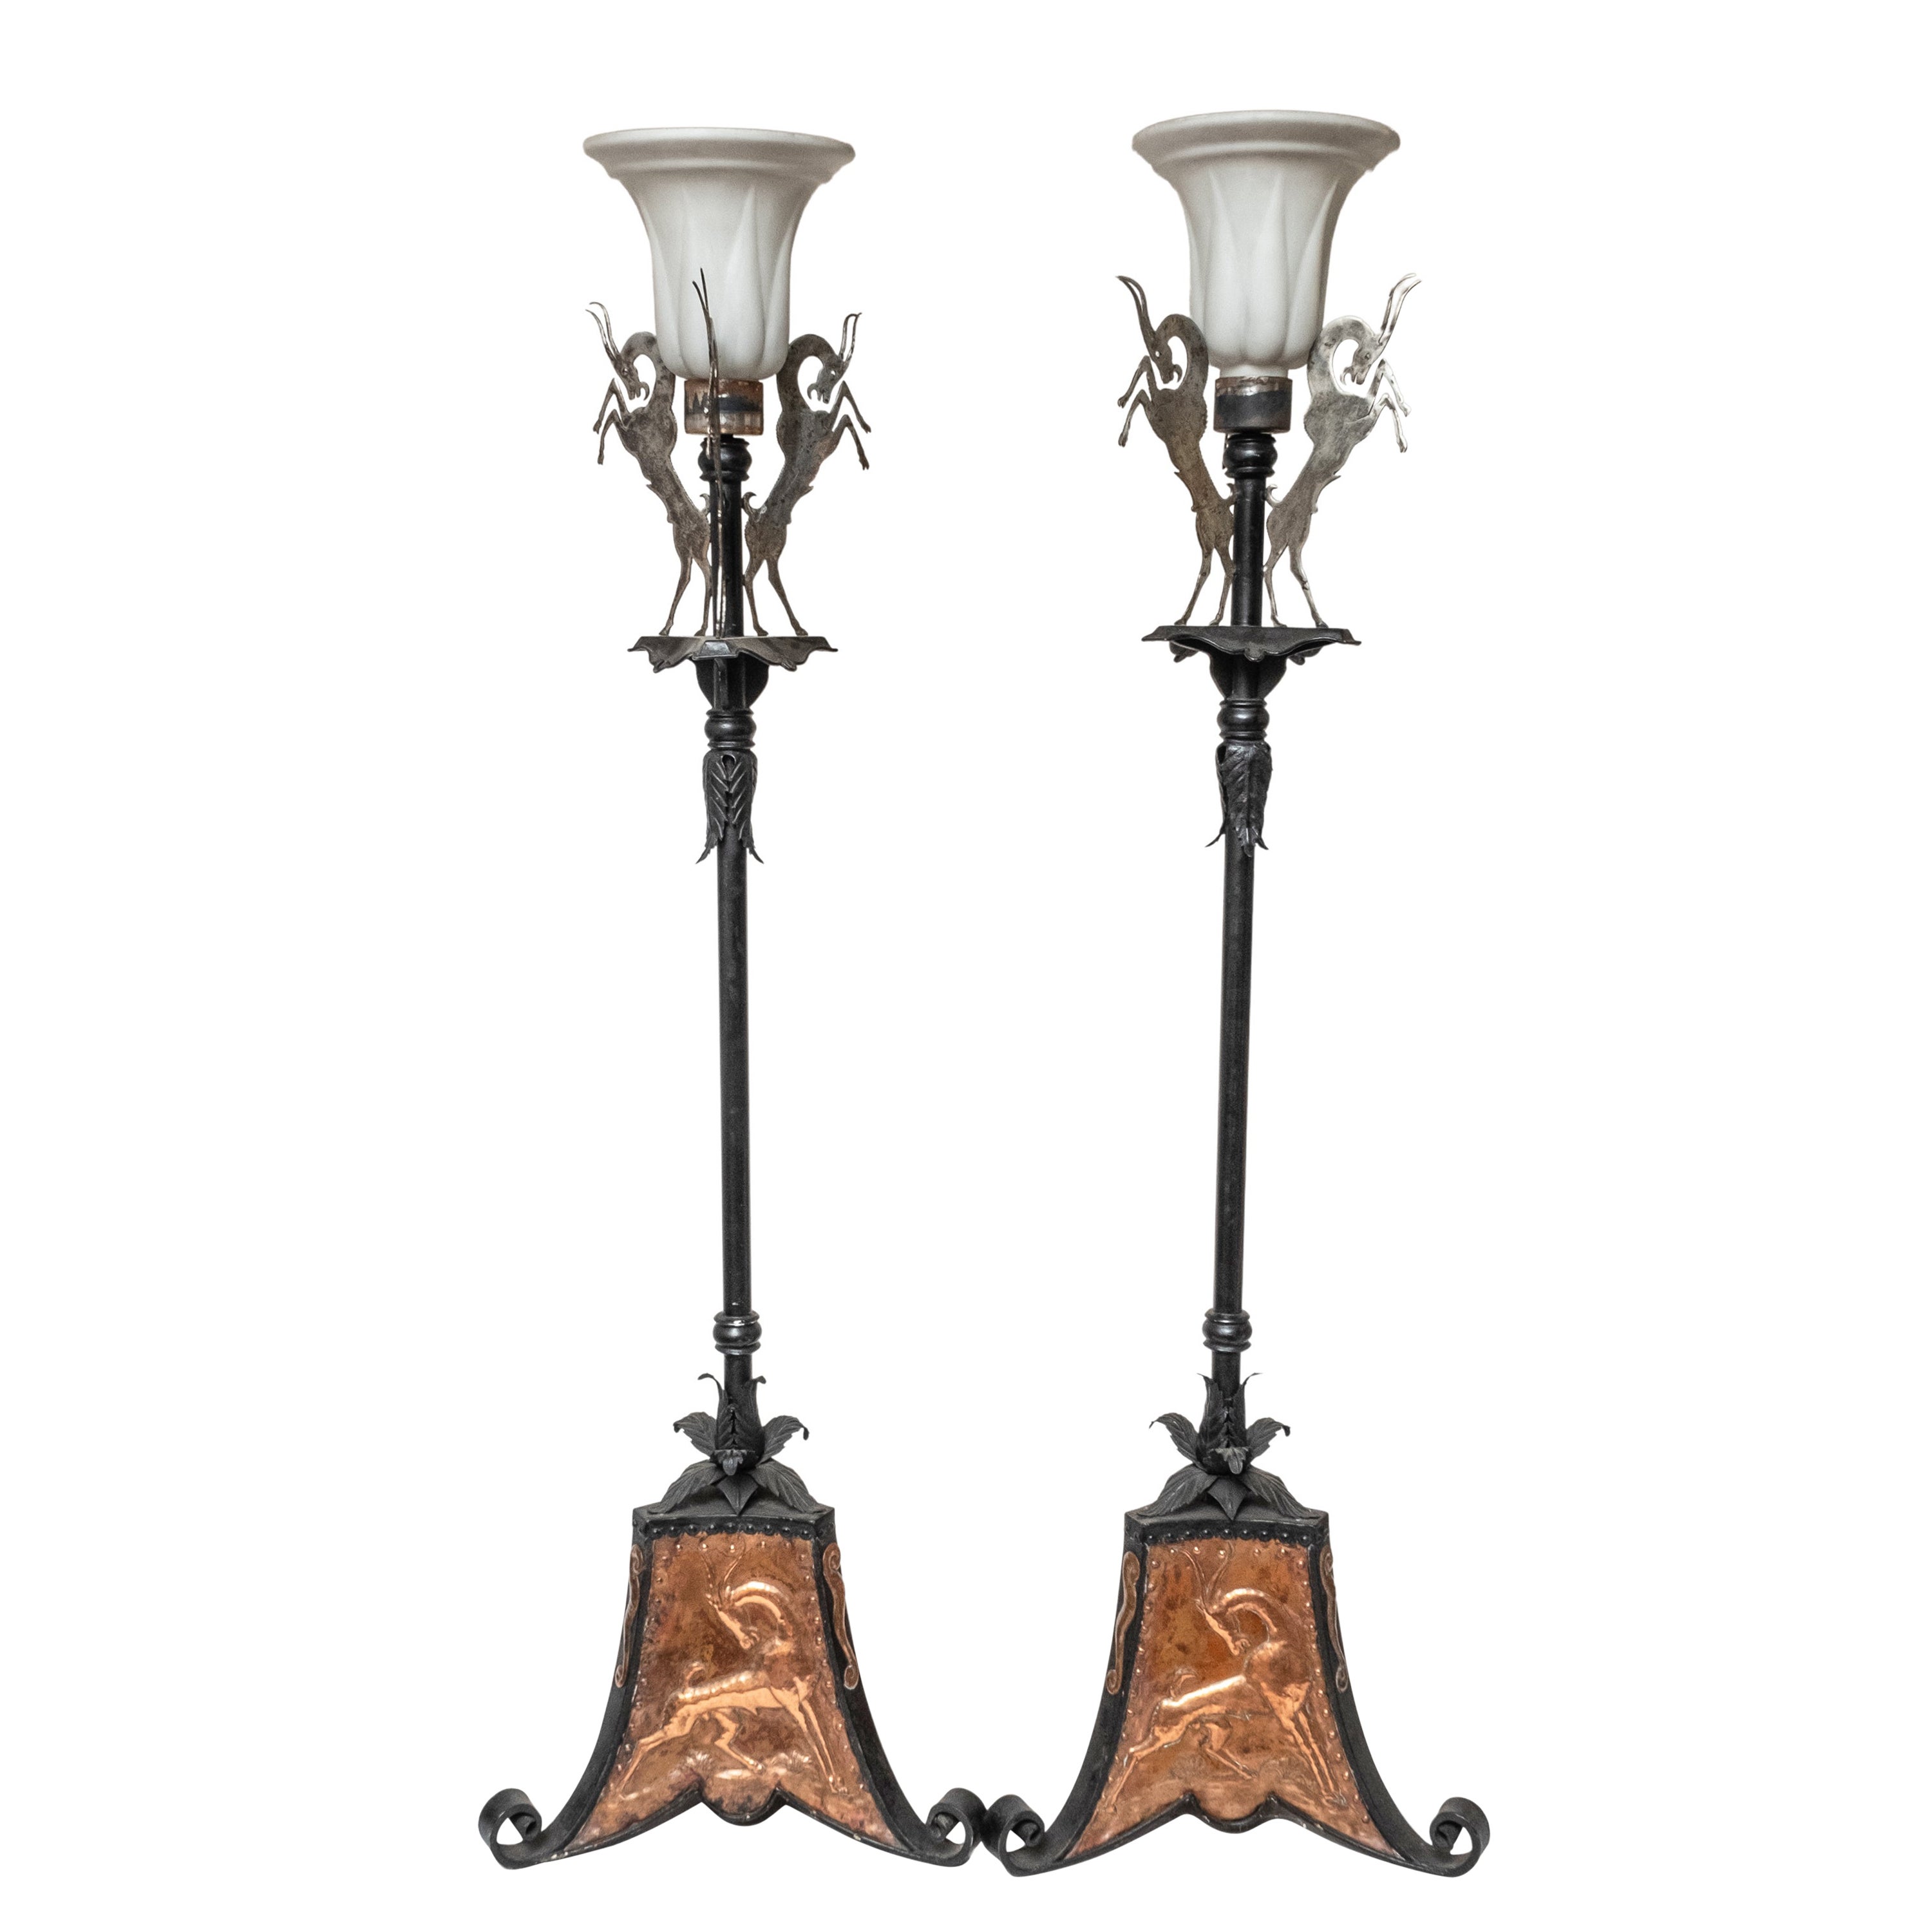 Exceptional William Hunt Diederich Pair of Torchieres For Sale